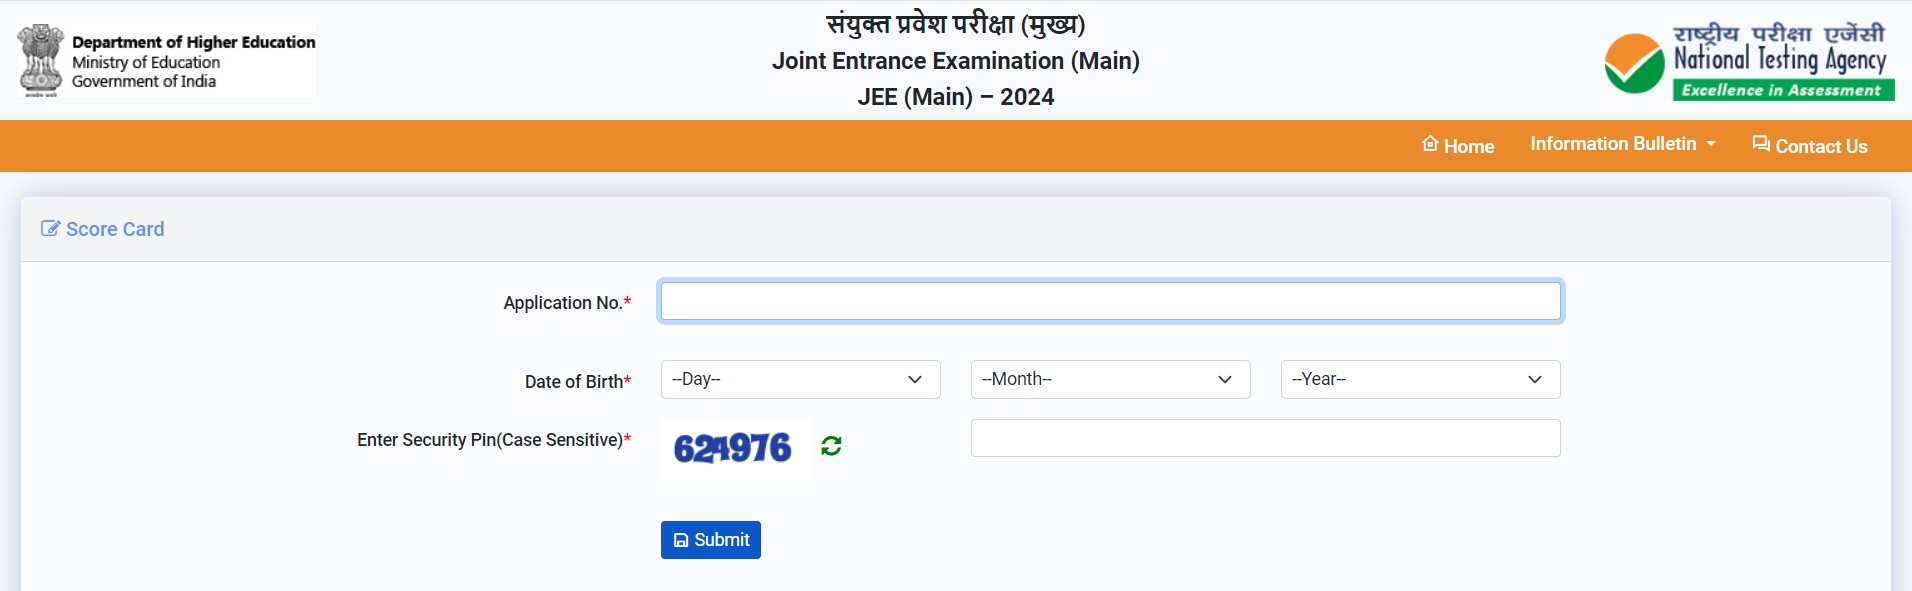 JEE Main Result (Session 2) 2024